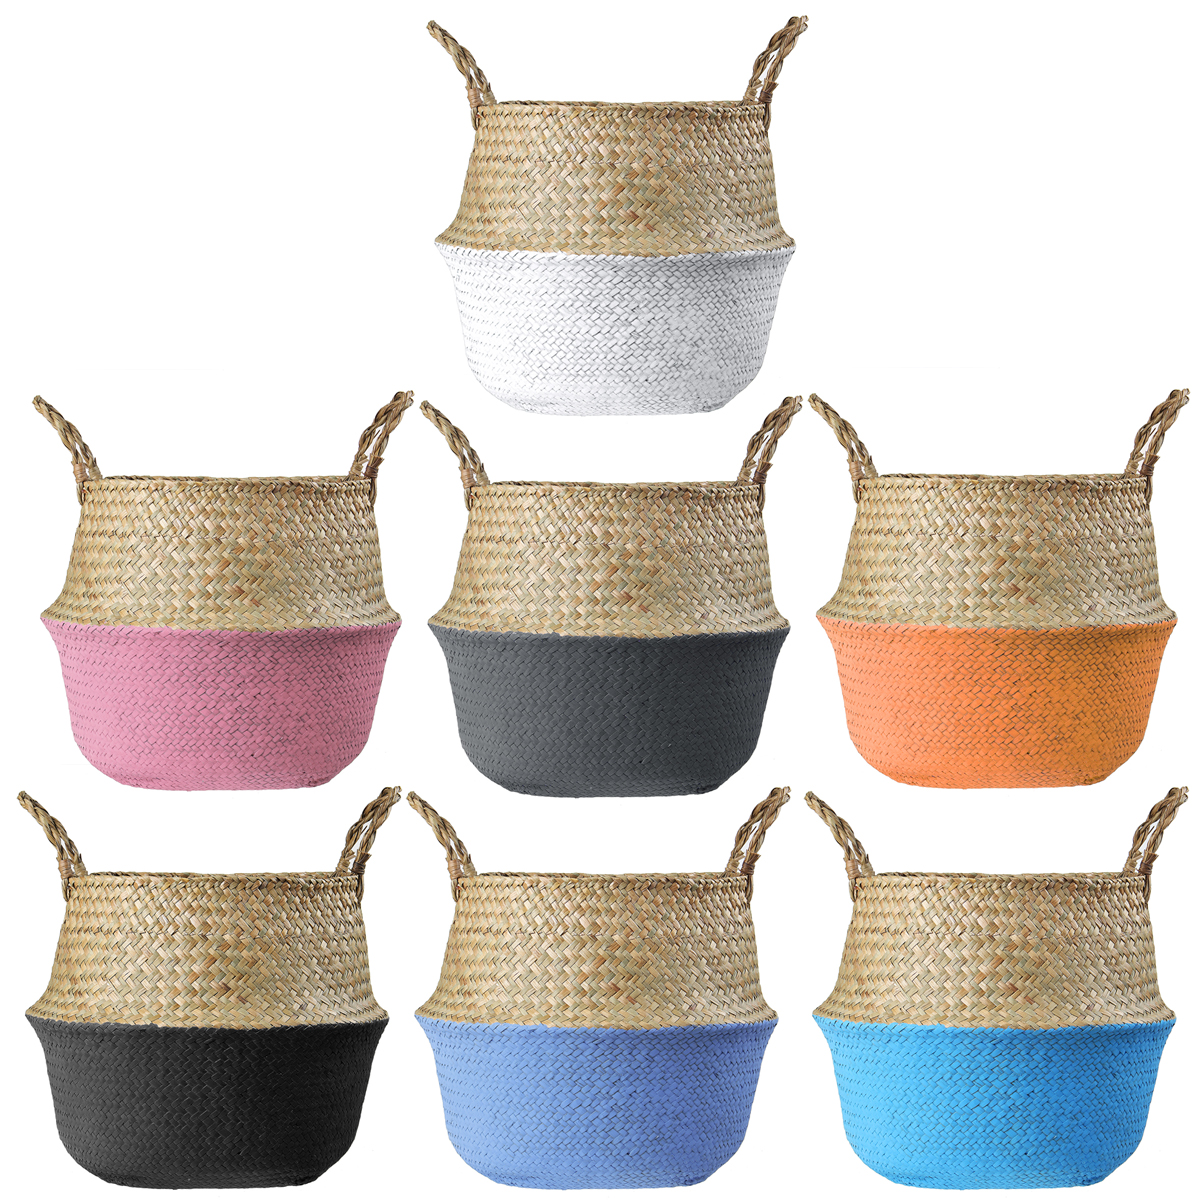 Woven-Flower-Basket-Foldable-Bamboo-Storage-Toy-Dirty-Clothes-Basket-Home-House-Supplies-1733912-2